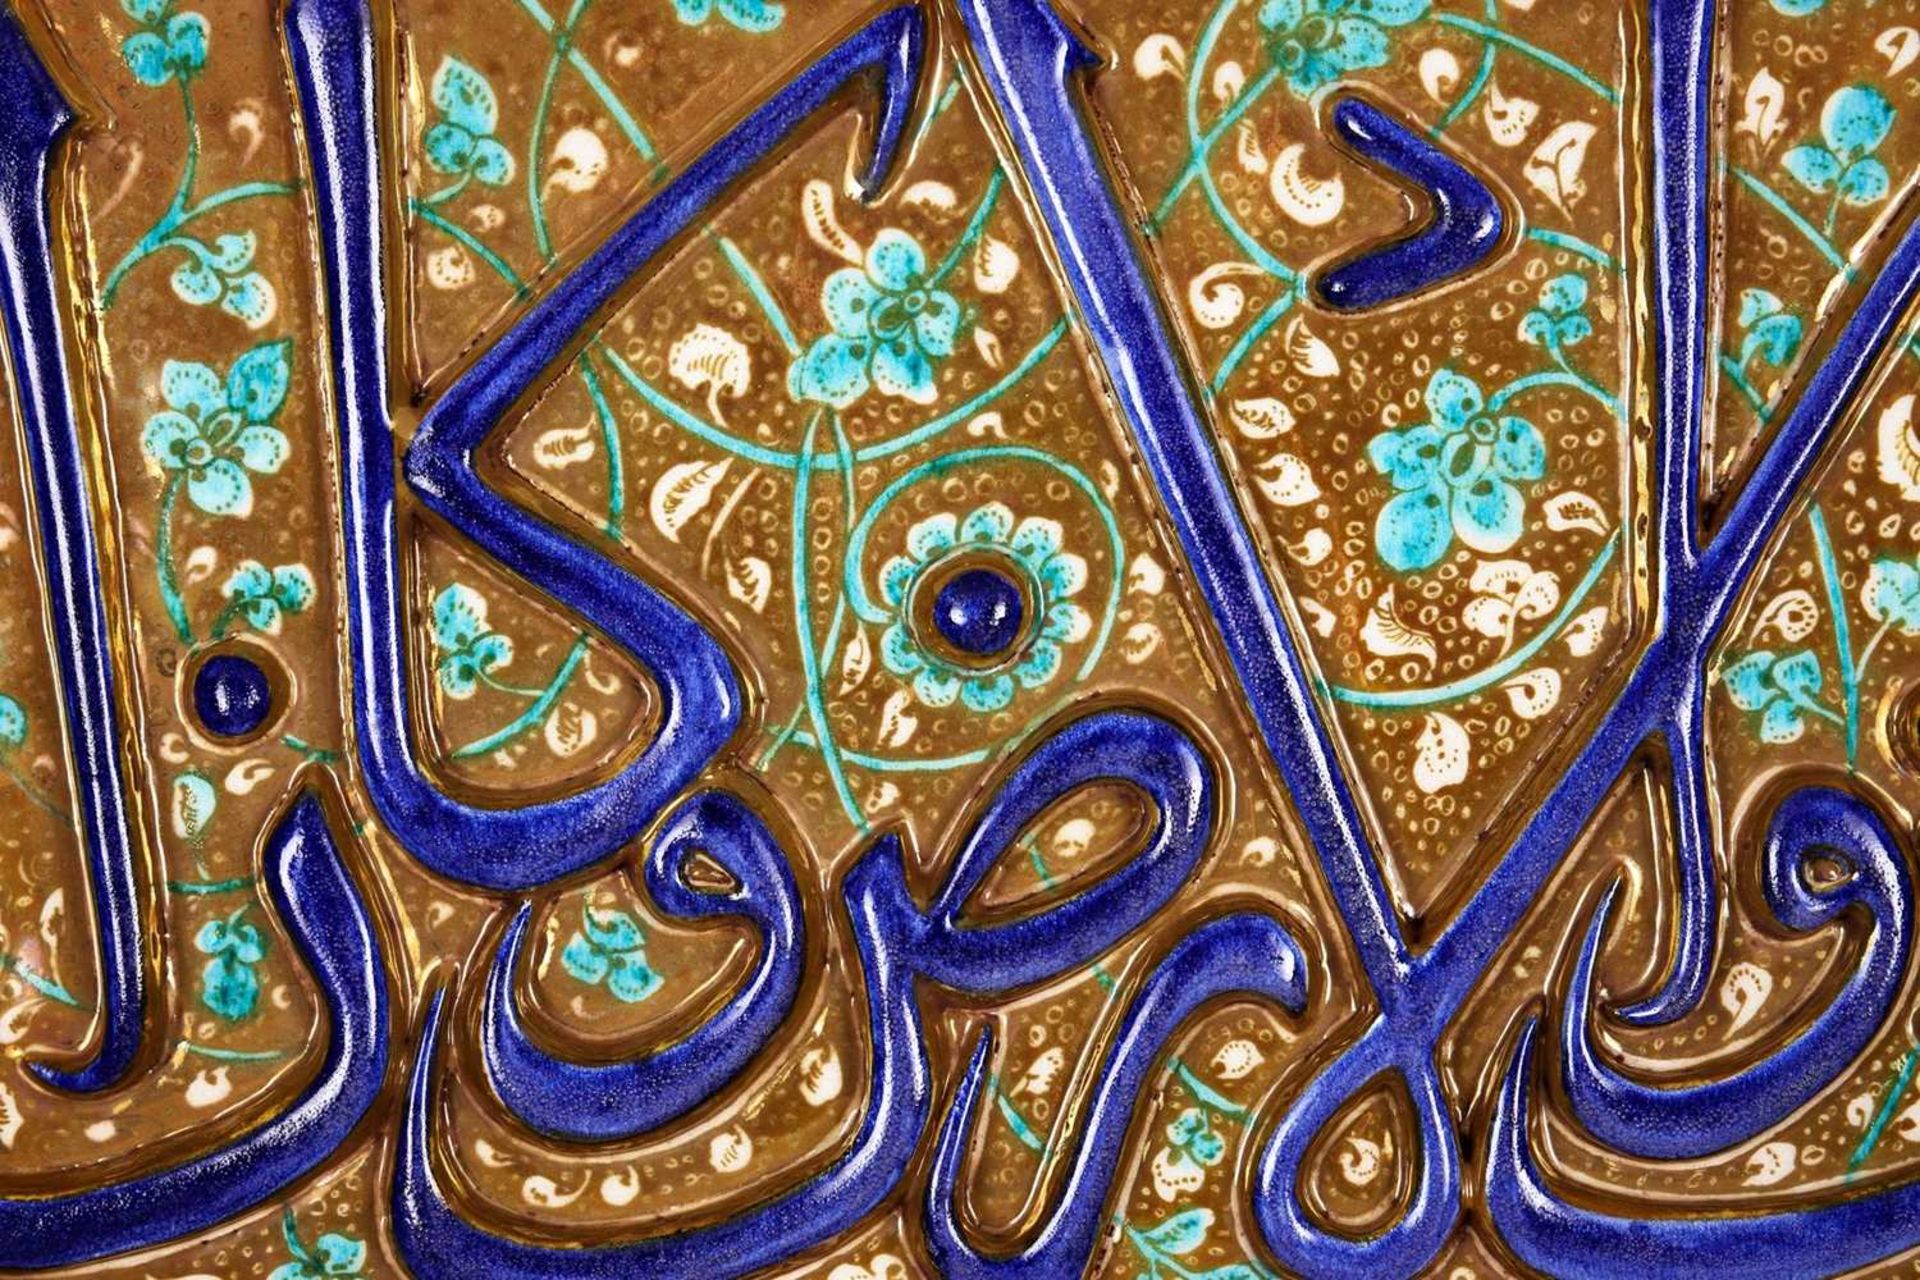 A LARGE 13TH / 14TH CENTURY STYLE KASHAN MOULDED LUSTRE POTTERY TILE - Image 2 of 2